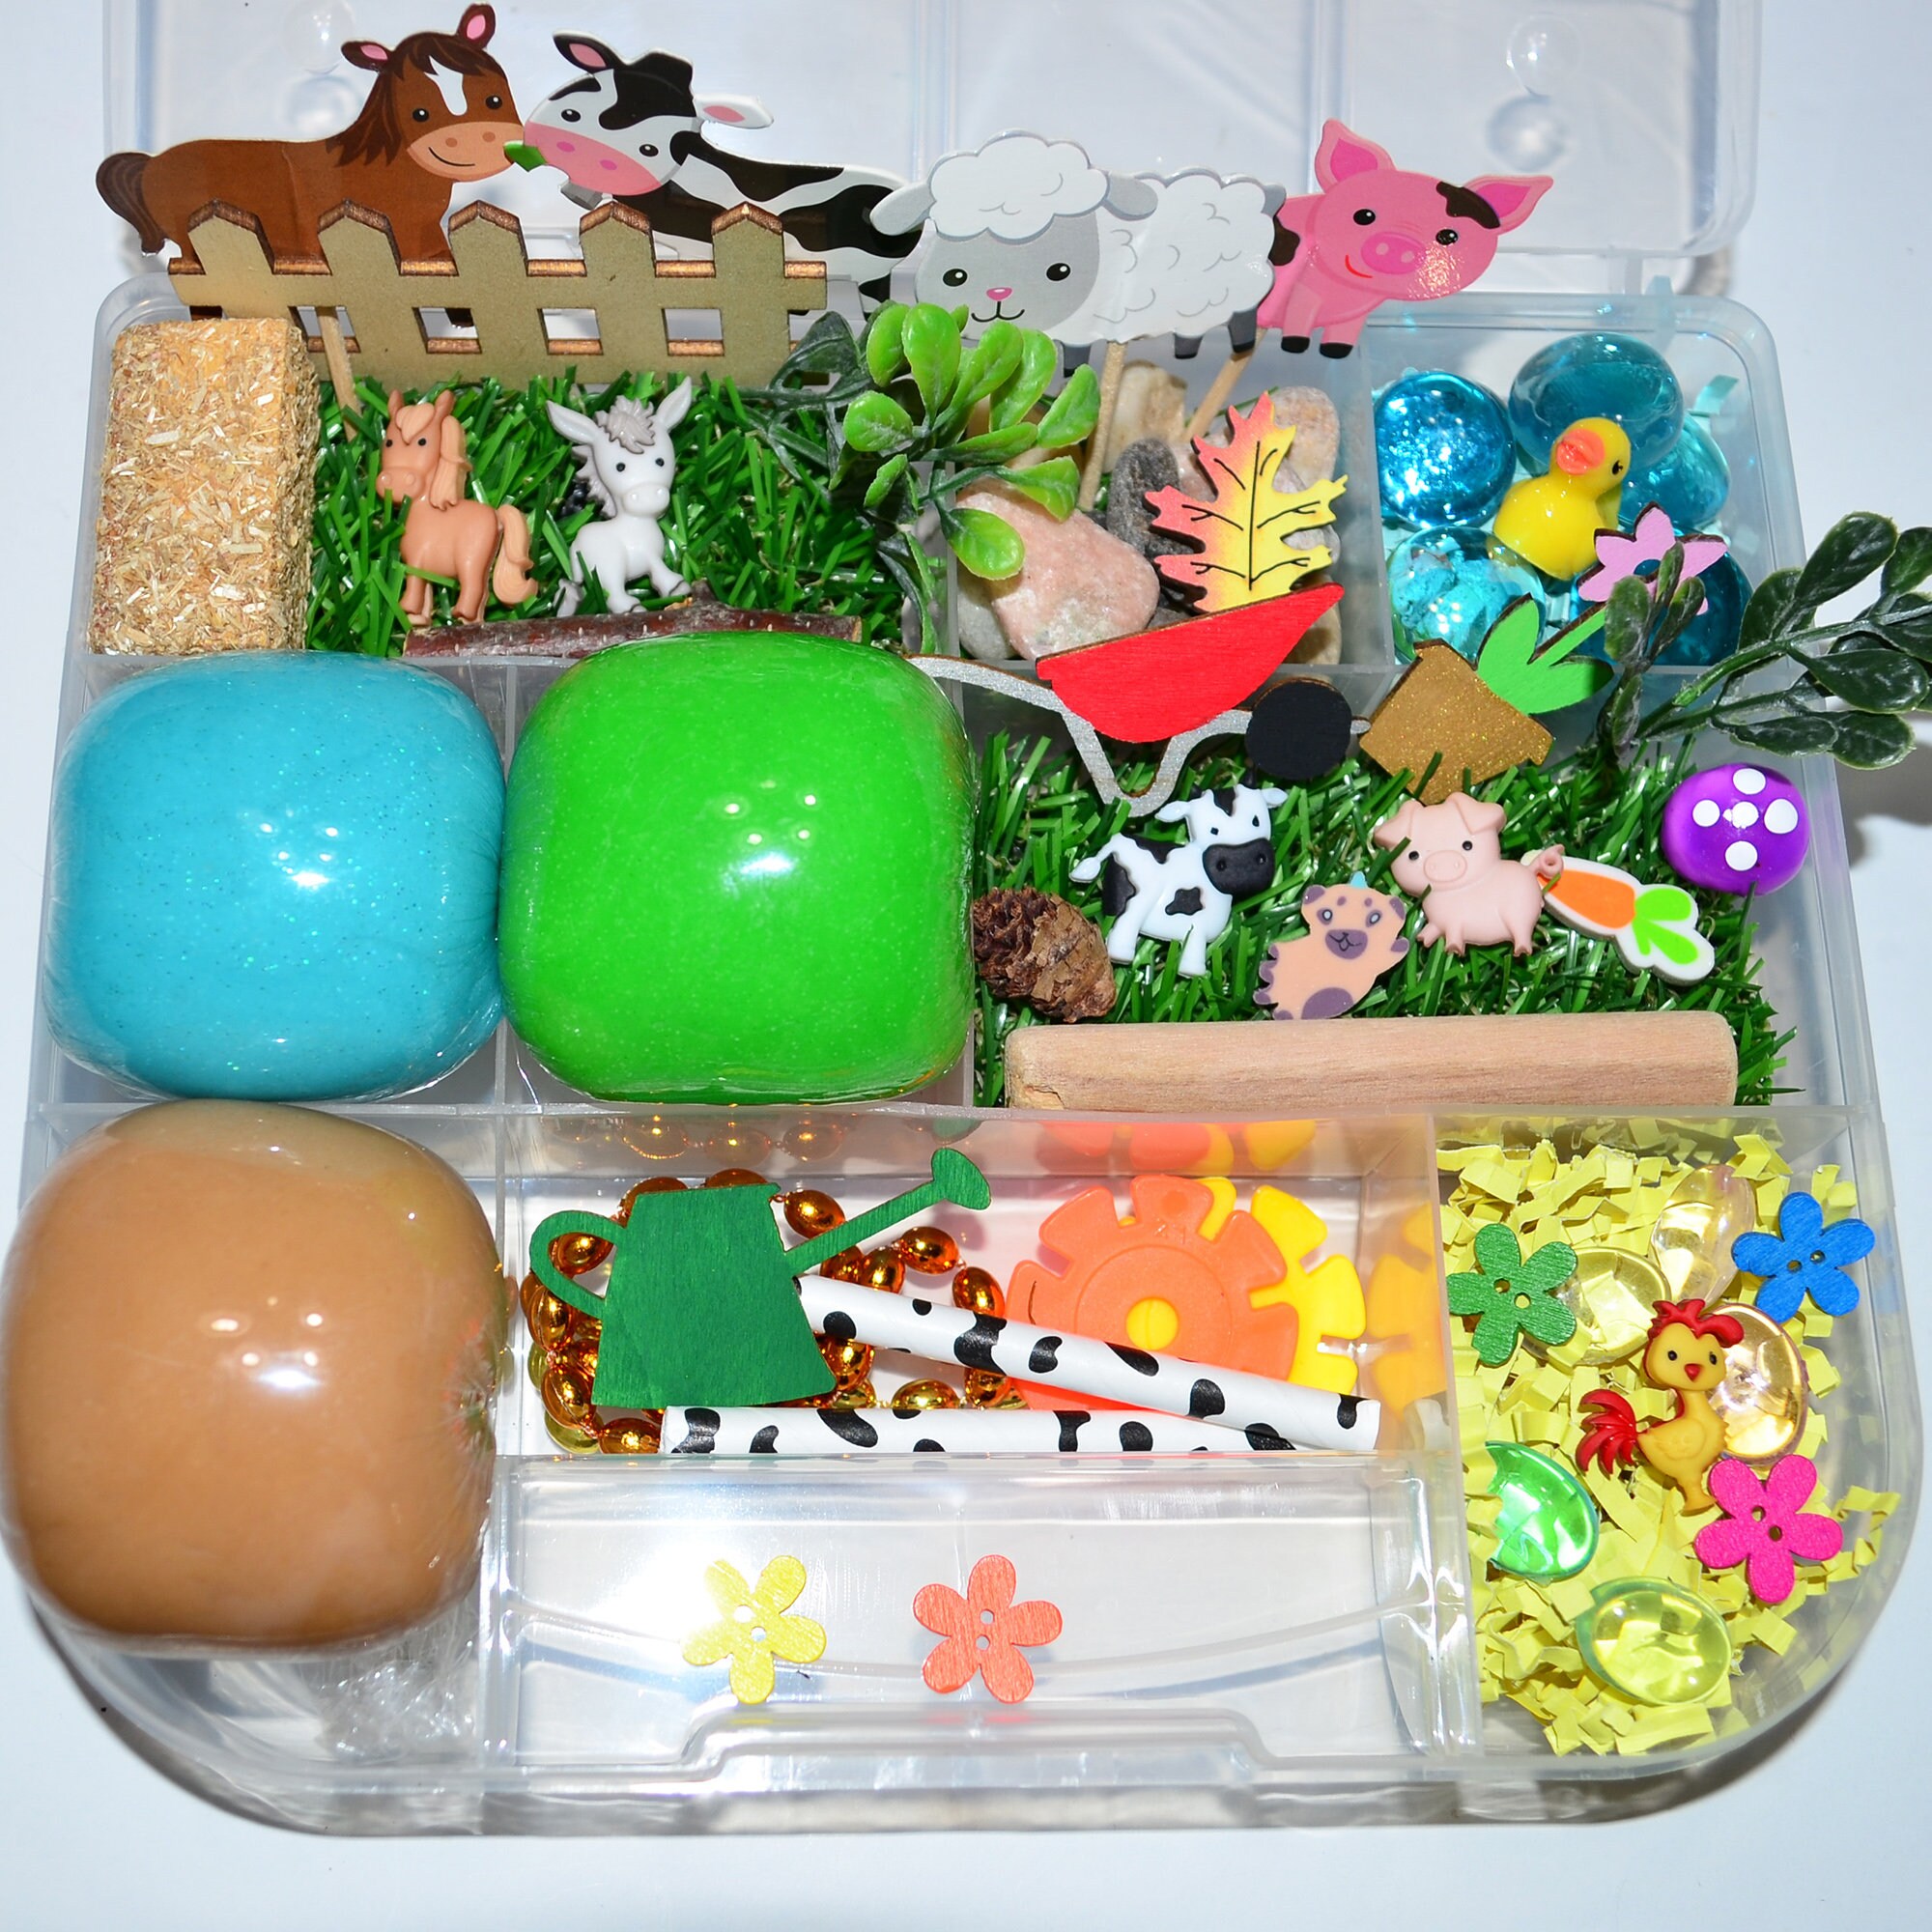 Outdoor Scents Playdough 6-pack - Play Dough, Play Doh, Non-Toxic, Party  Favors, Campfire, Ocean Breeze, Berries, S'mores, Nature Smells